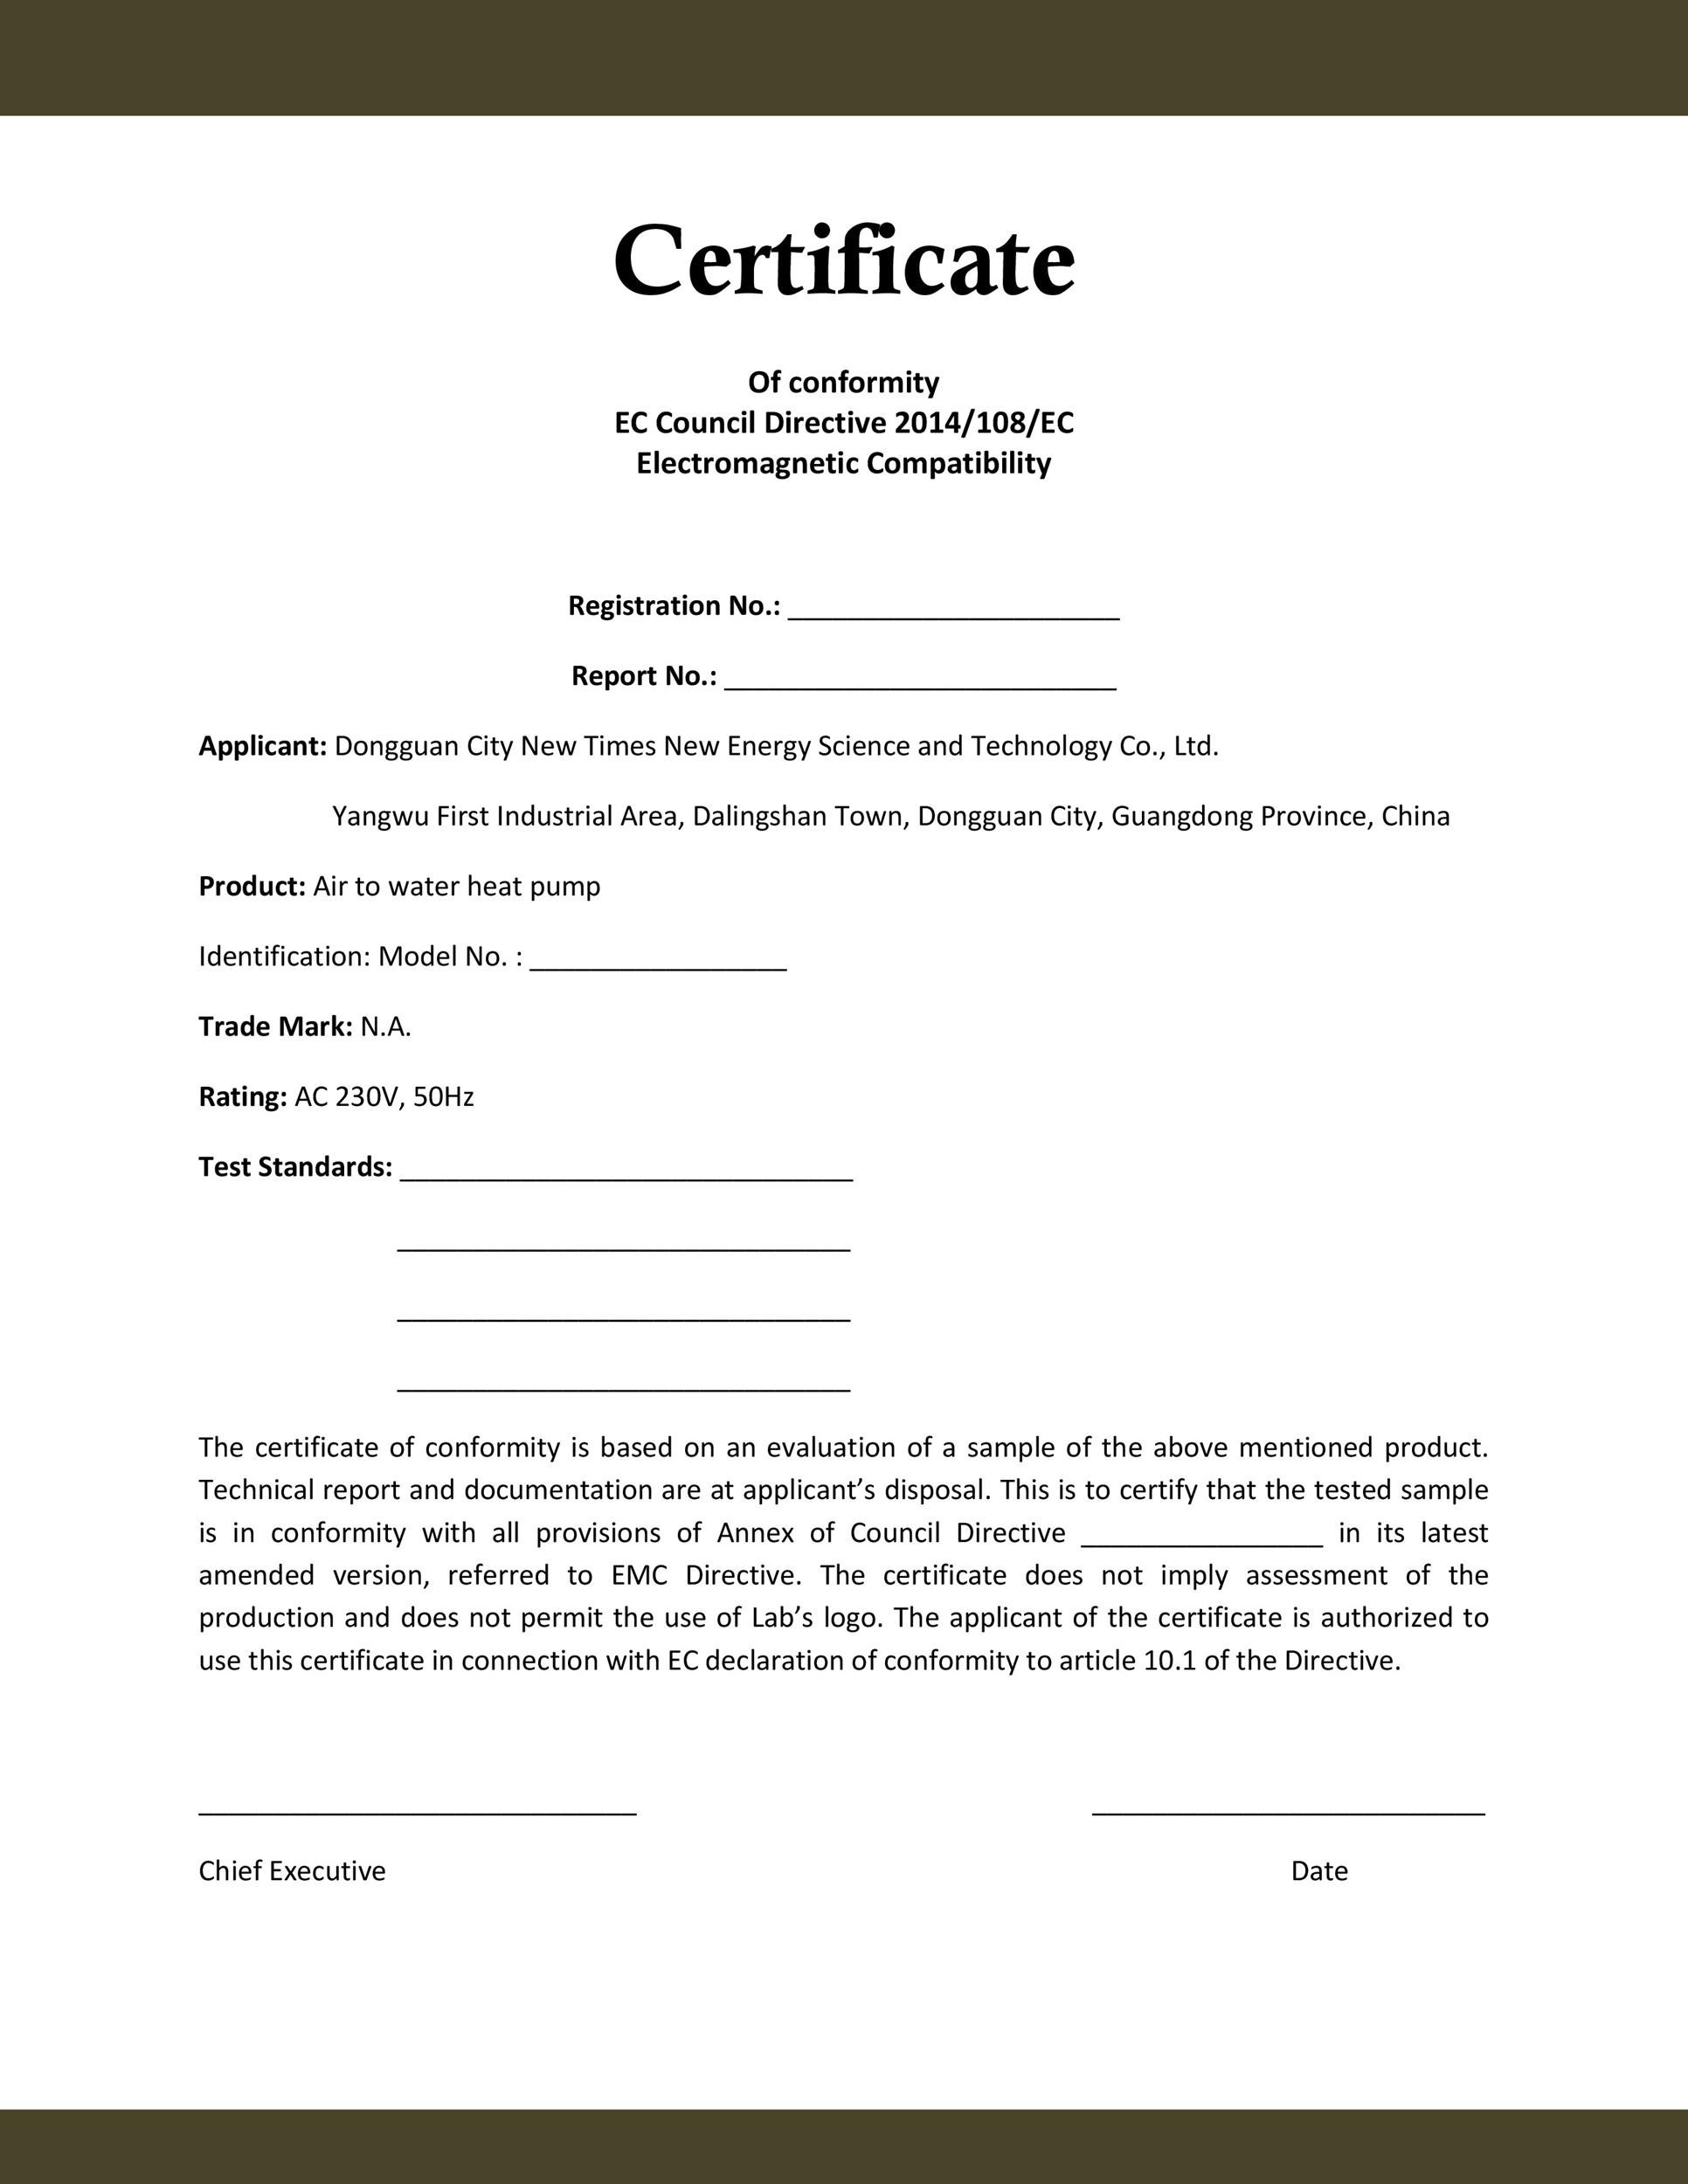 40 Free Certificate Of Conformance Templates Forms ᐅ Templatelab